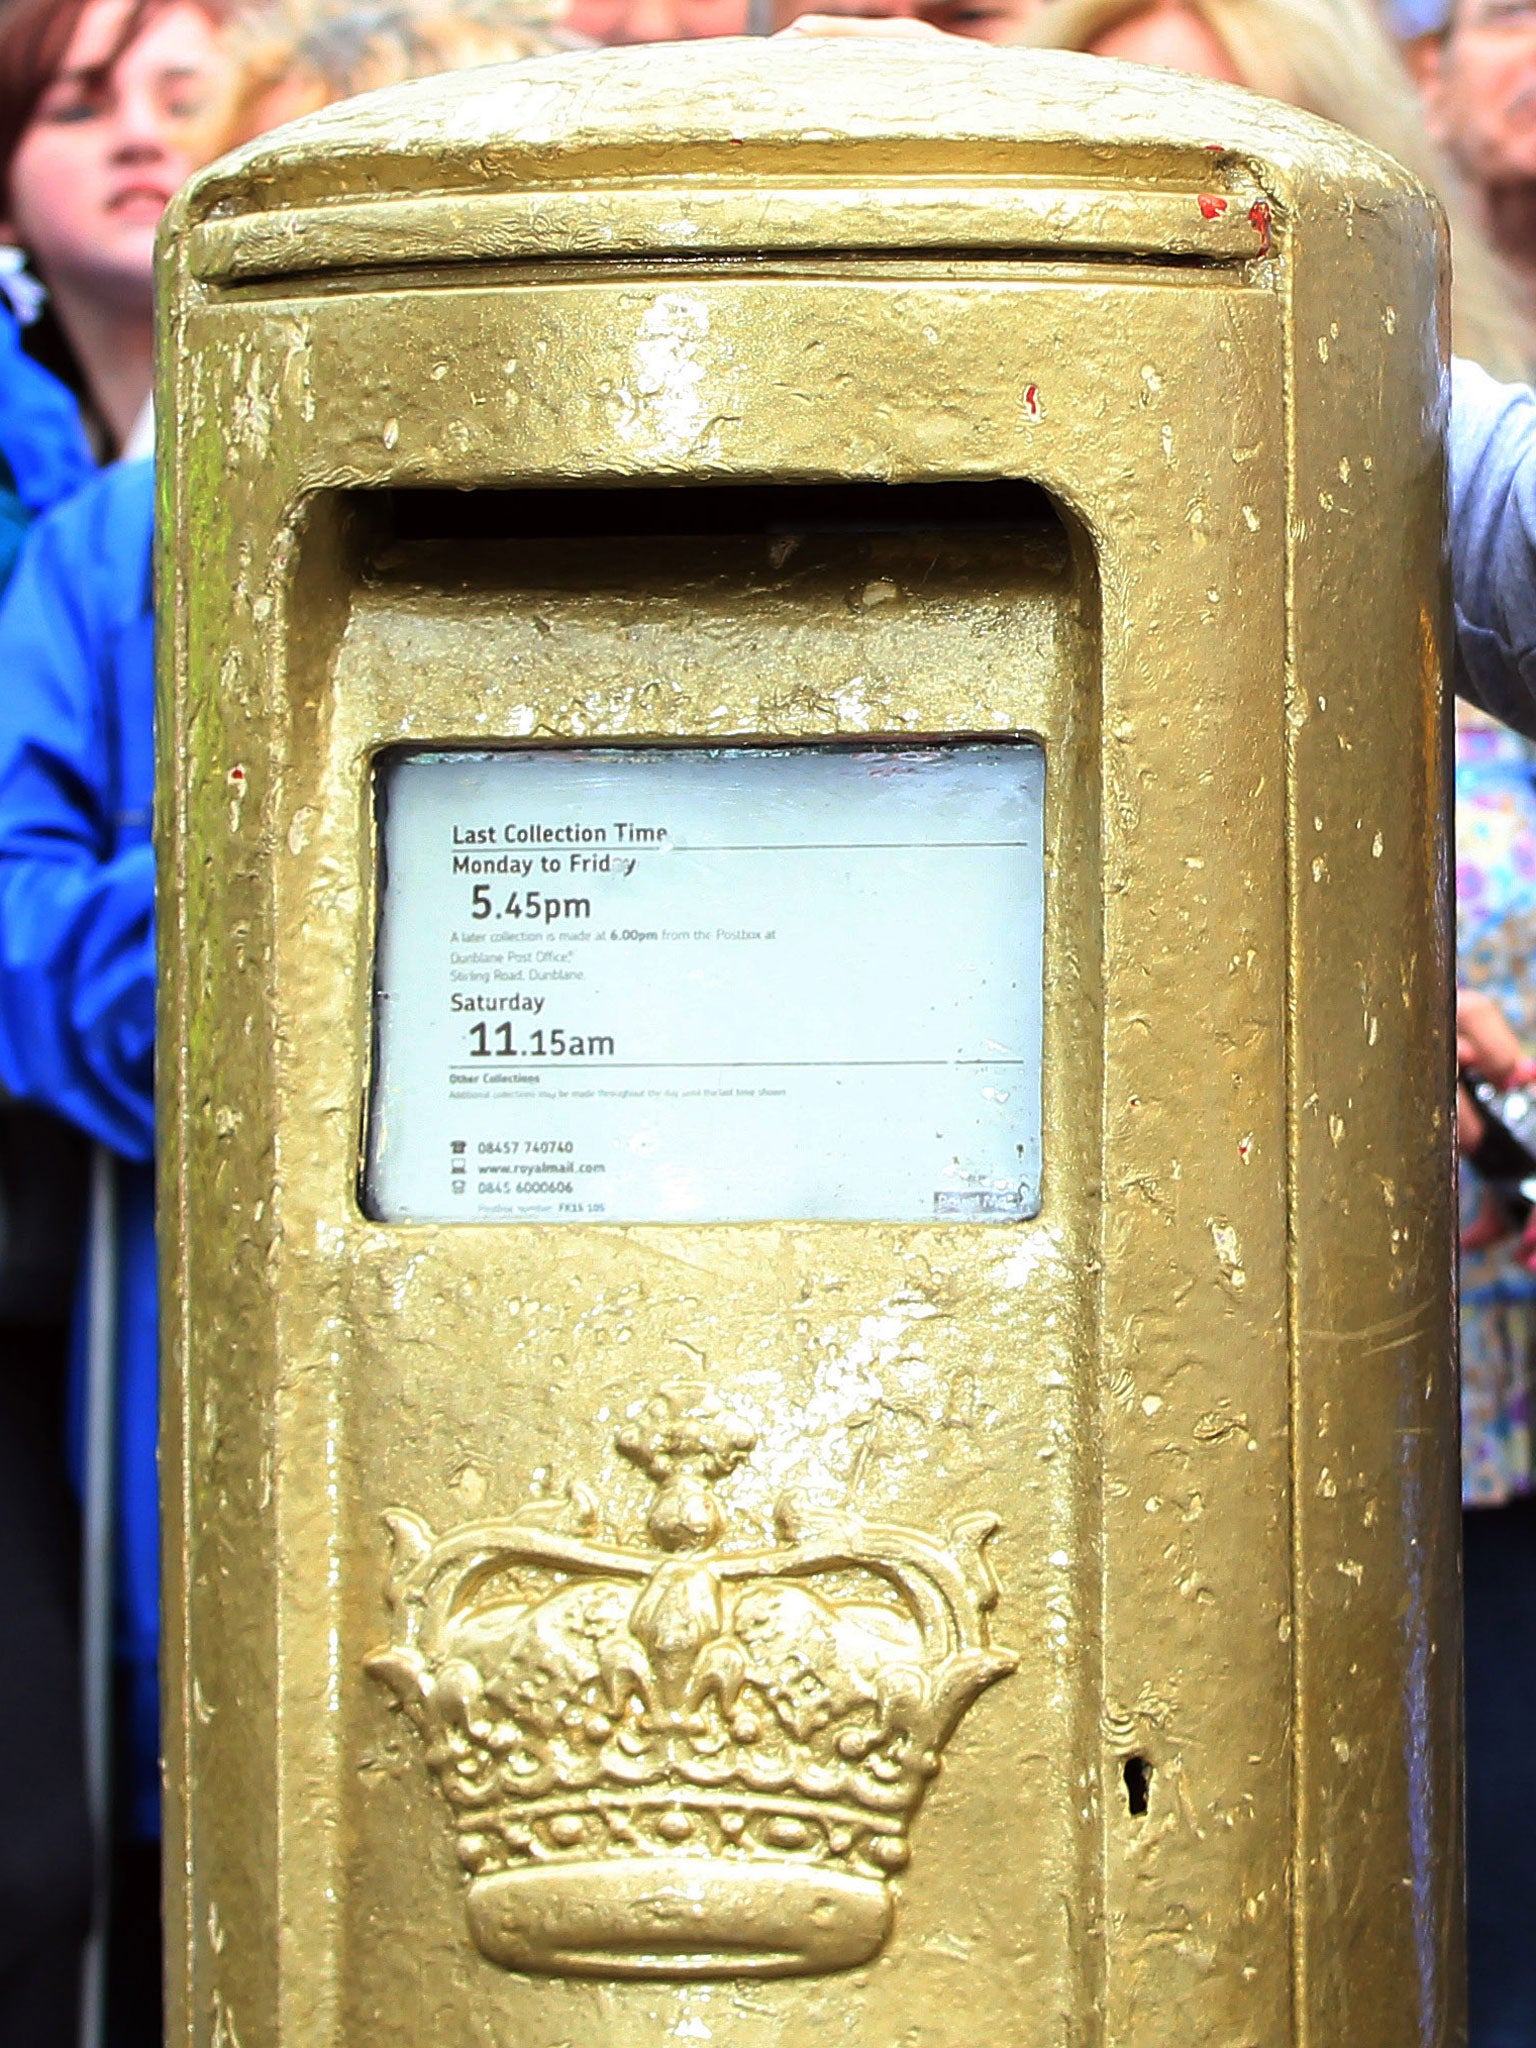 The gold pillar box is a popular spot for photographs just outside the courts